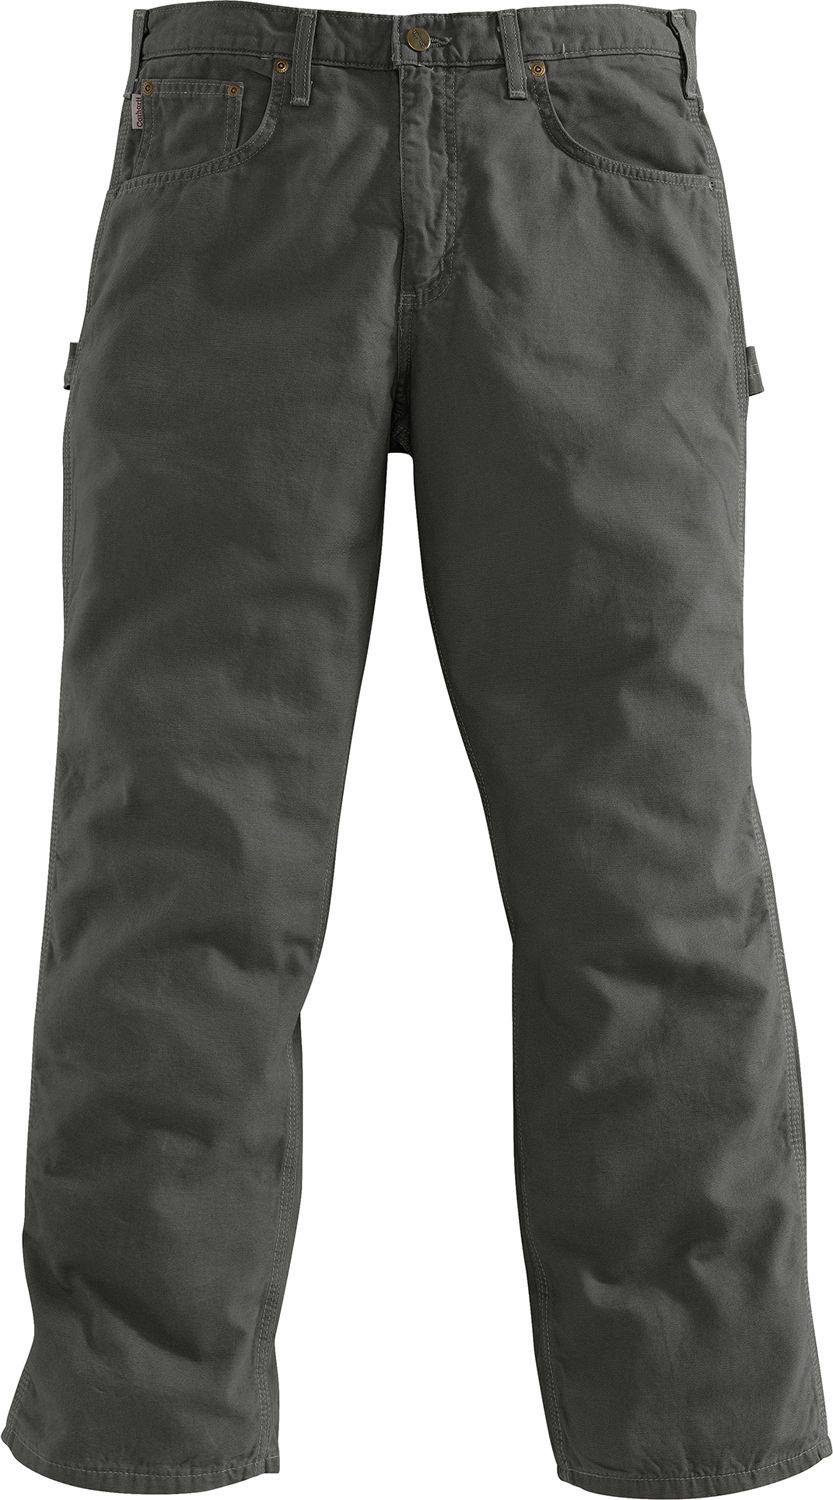 Carhartt Canvas Carpenter Jeans in Charcoal (Gray) for Men - Lyst